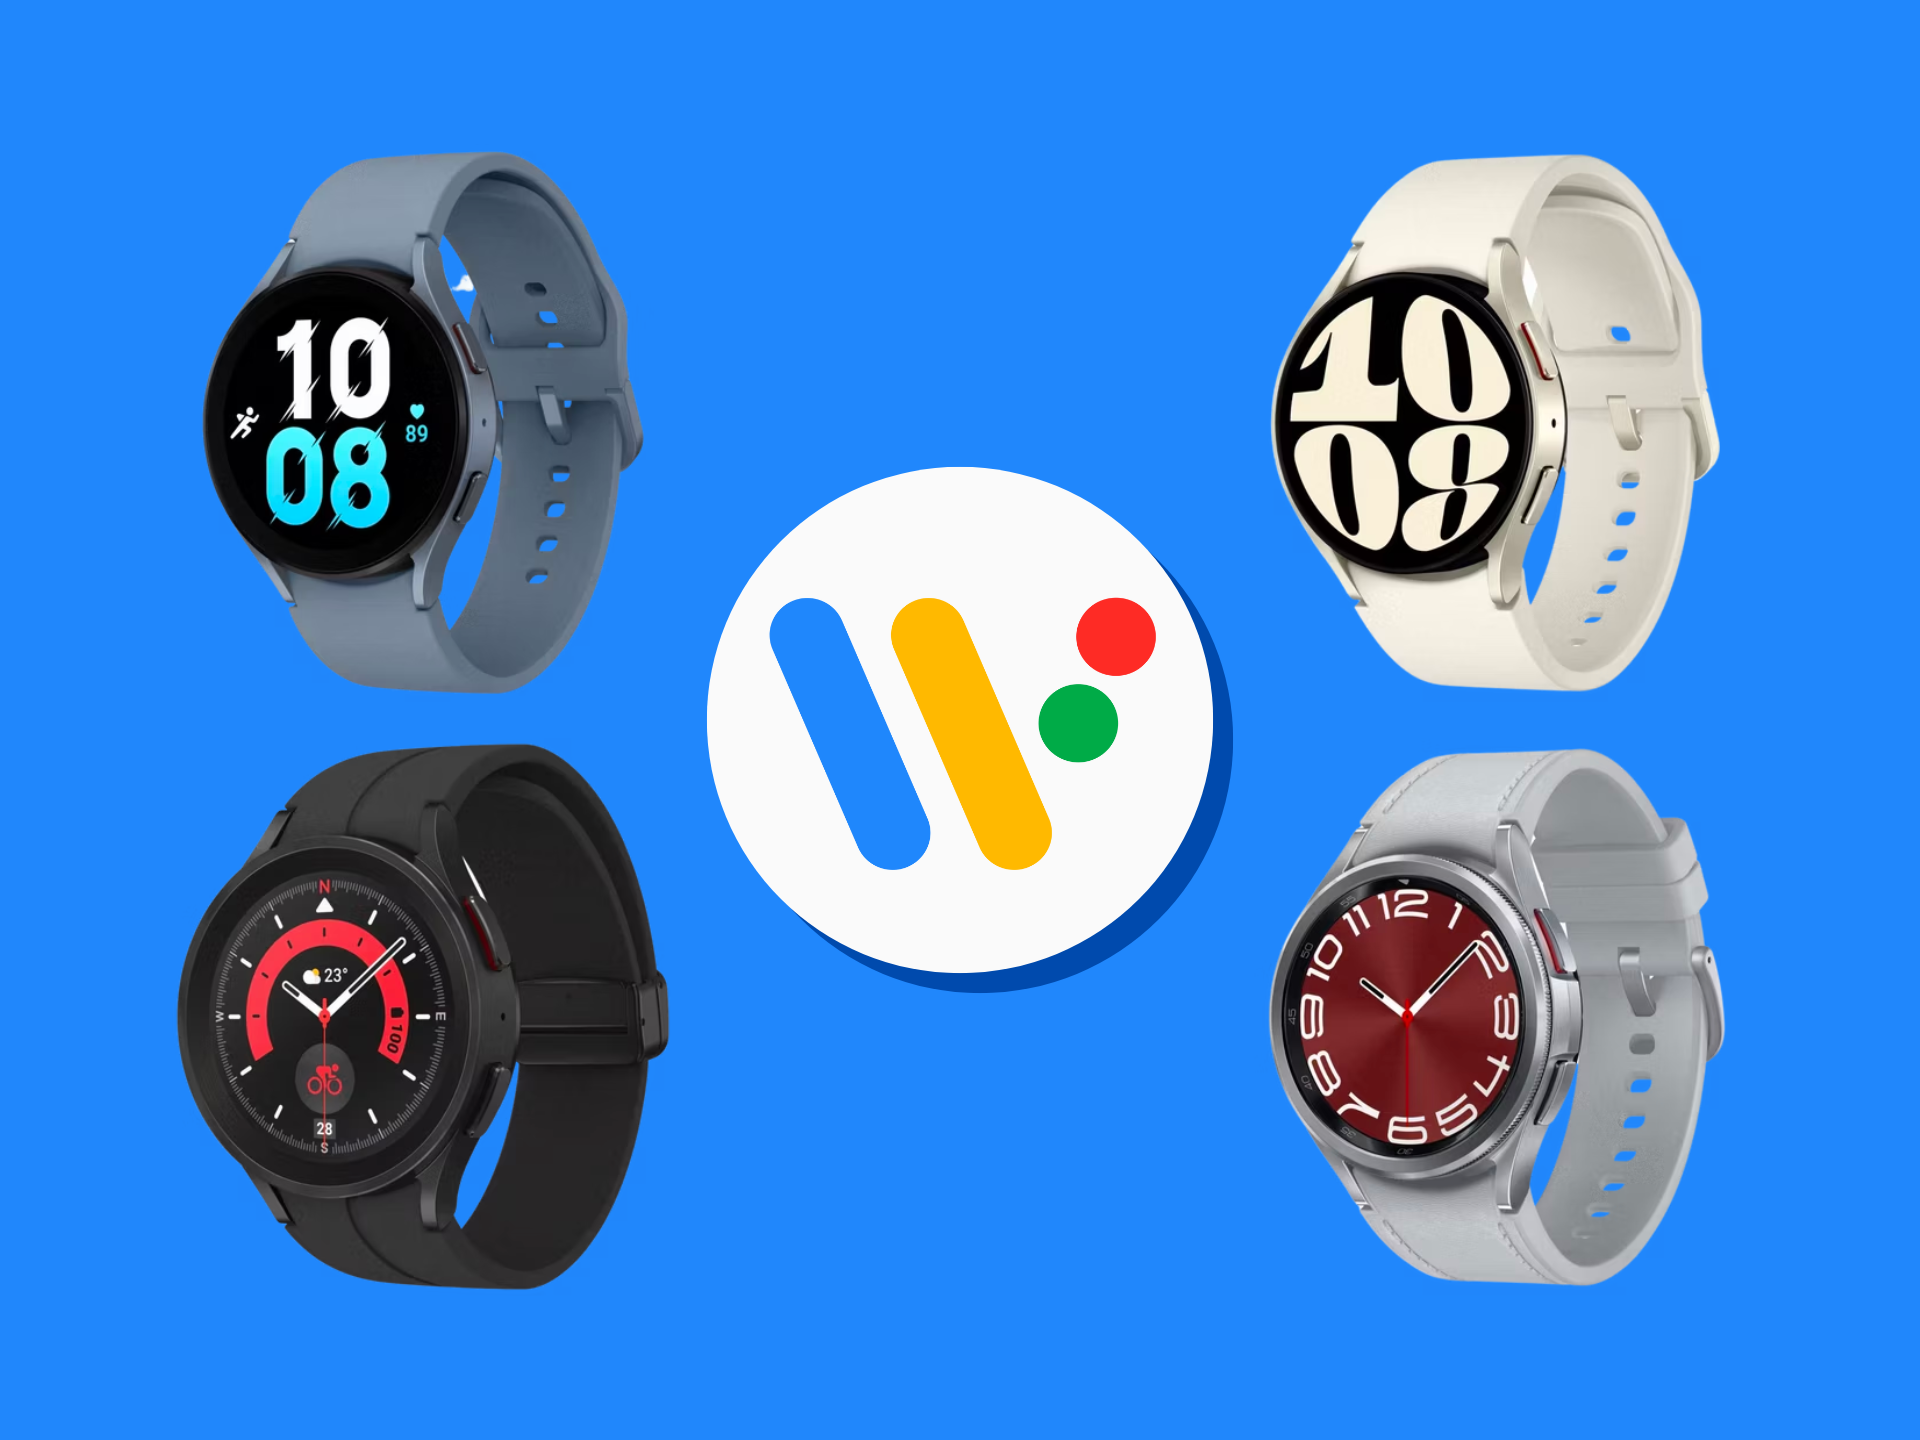 state-of-google-wear-os-4:-list-of-compatible-smartwatches